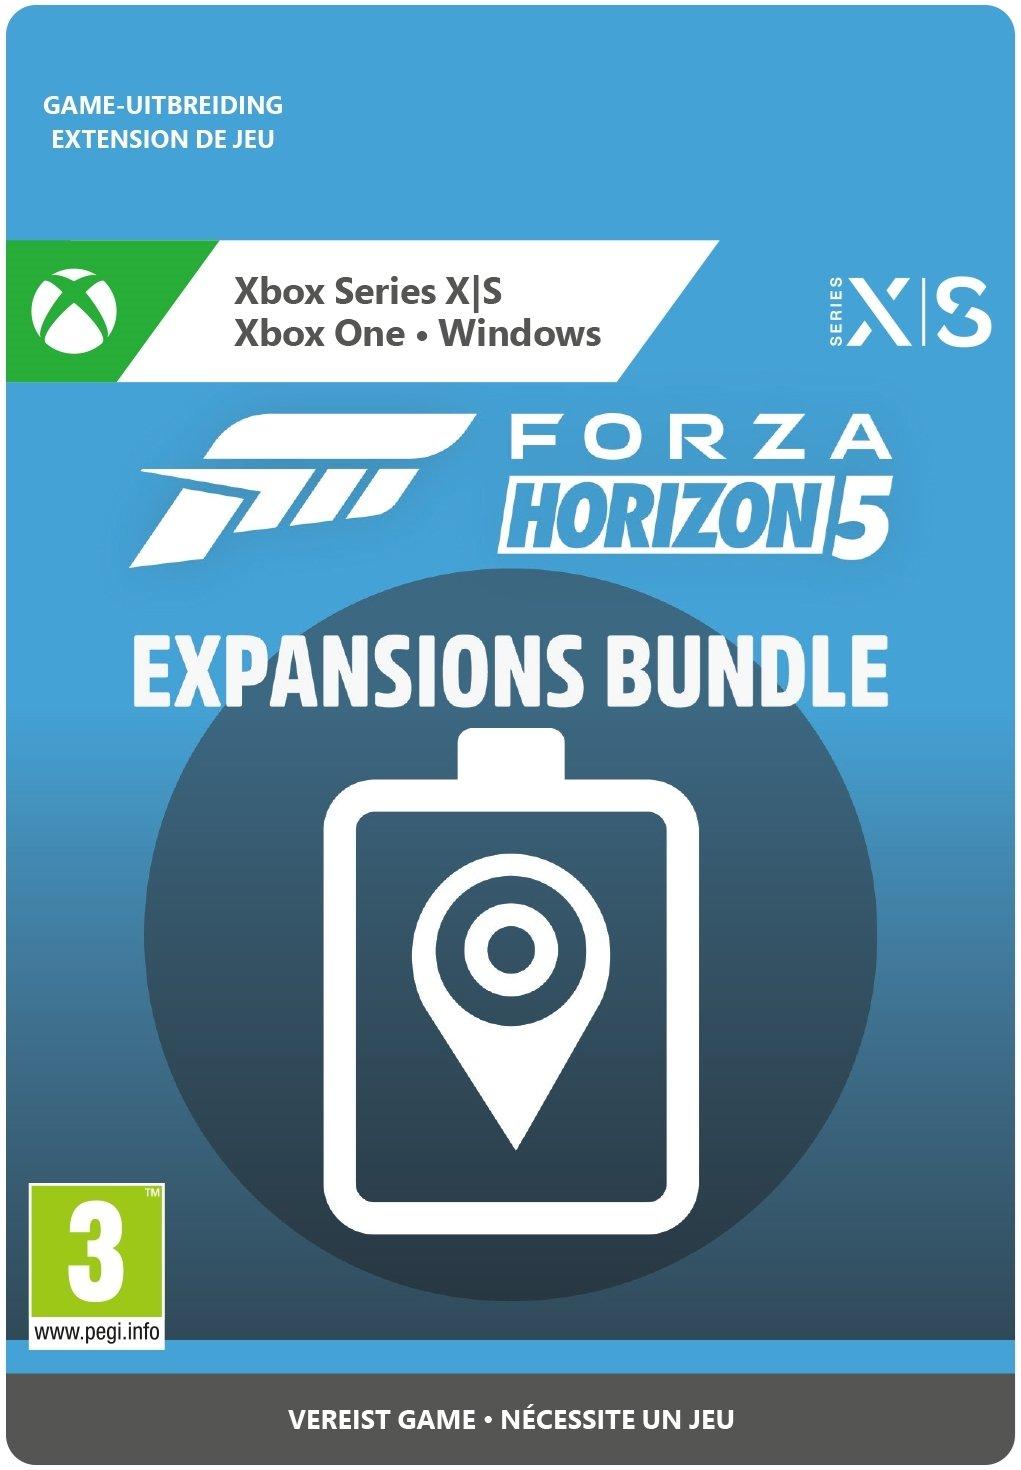 Forza Horizon 5: Expansions Bundle - Xbox Series X/Xbox One/Win10 - Add-on | 7CN-00090 (65d9893e-3b05-b543-8d4a-c749bfef562c)